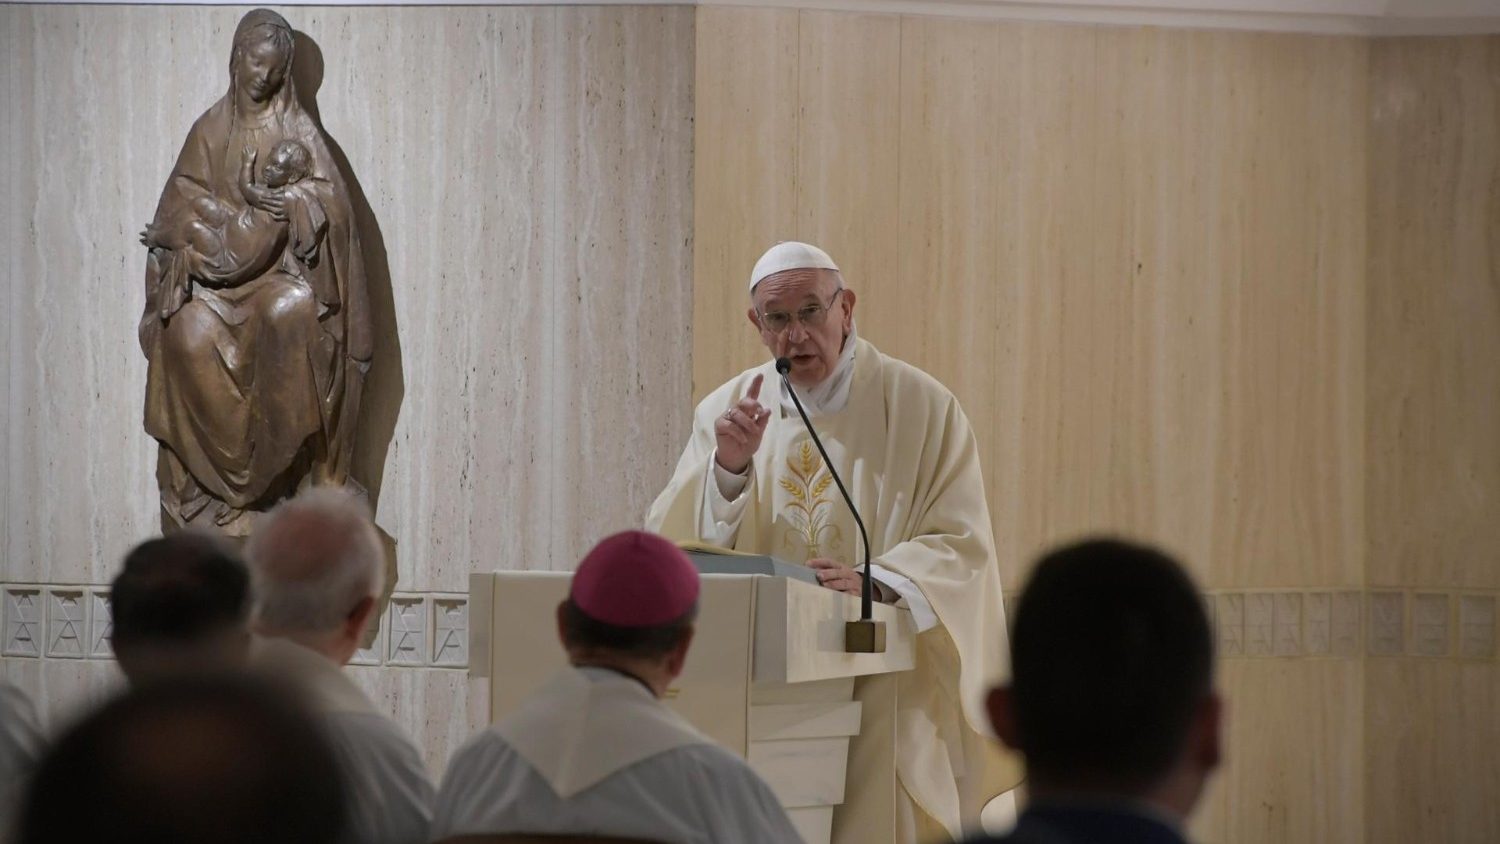 Pope Francis at Mass: 'Generosity enlarges the heart' - Vatican News